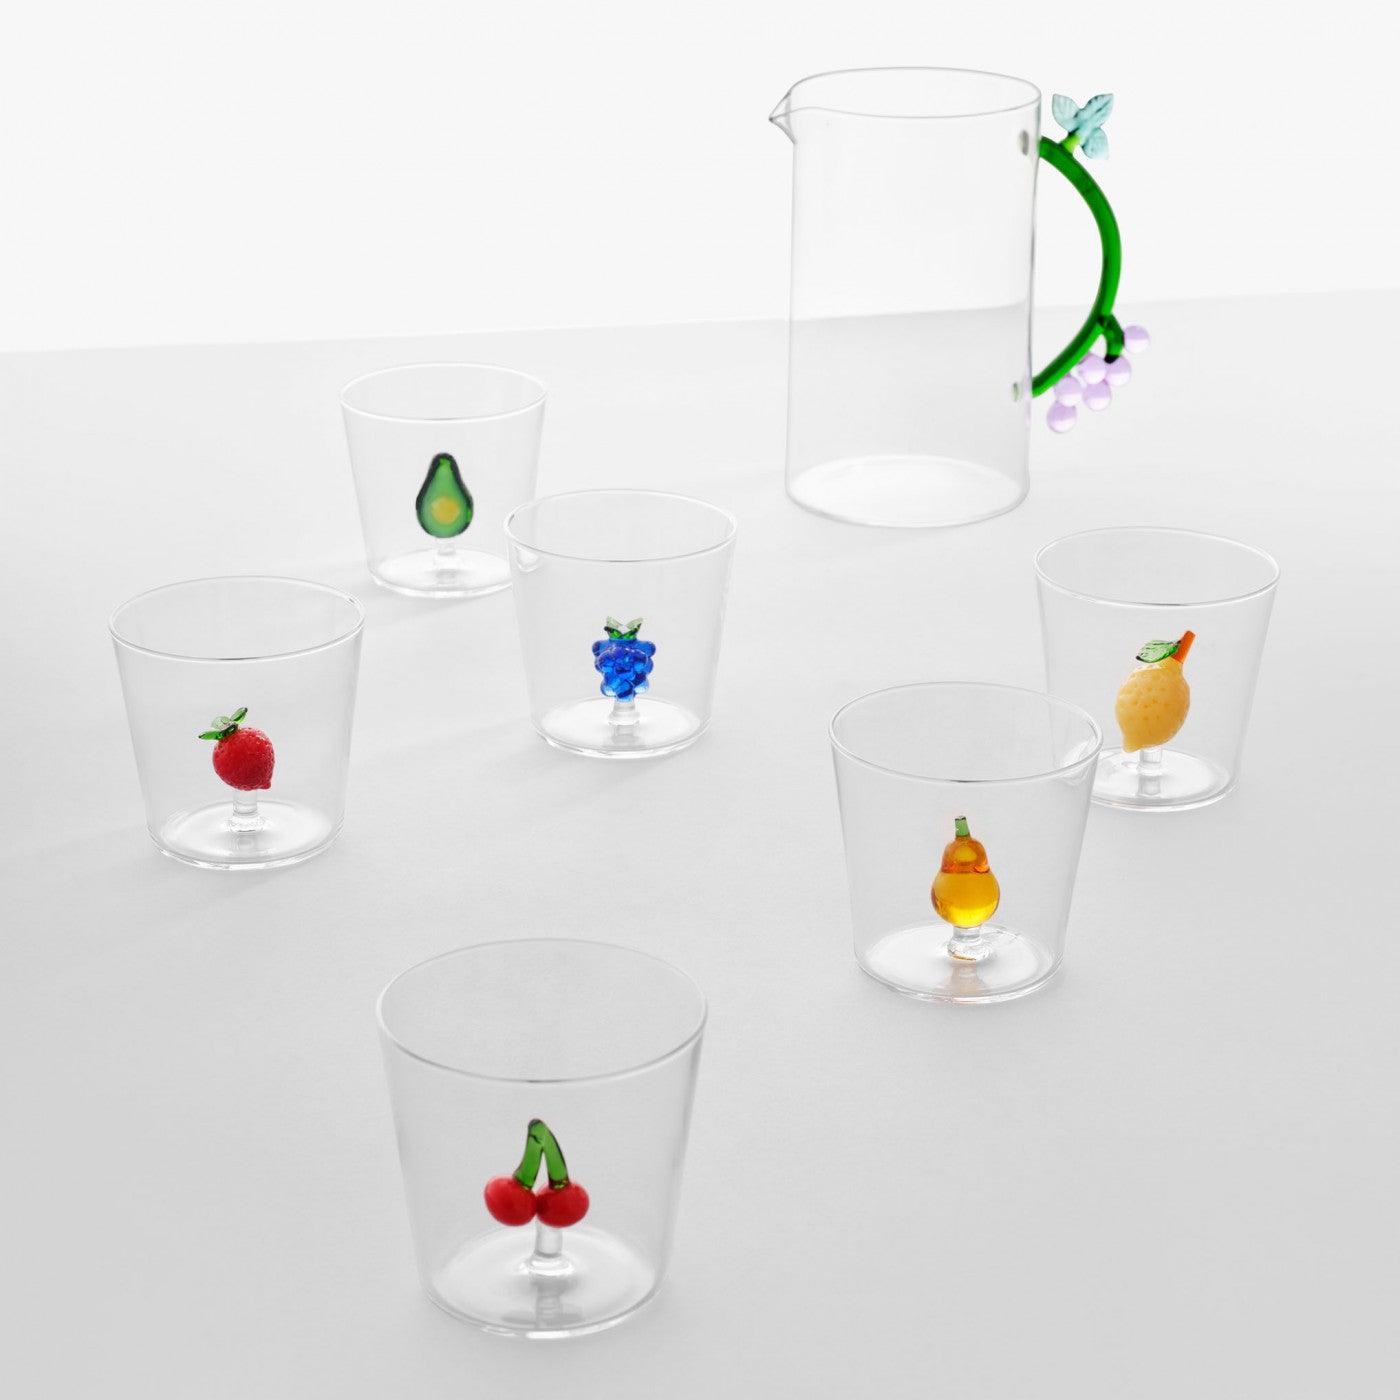 ICHENDORF // GLASS FRUITS AND FLOWERS COLLECTION